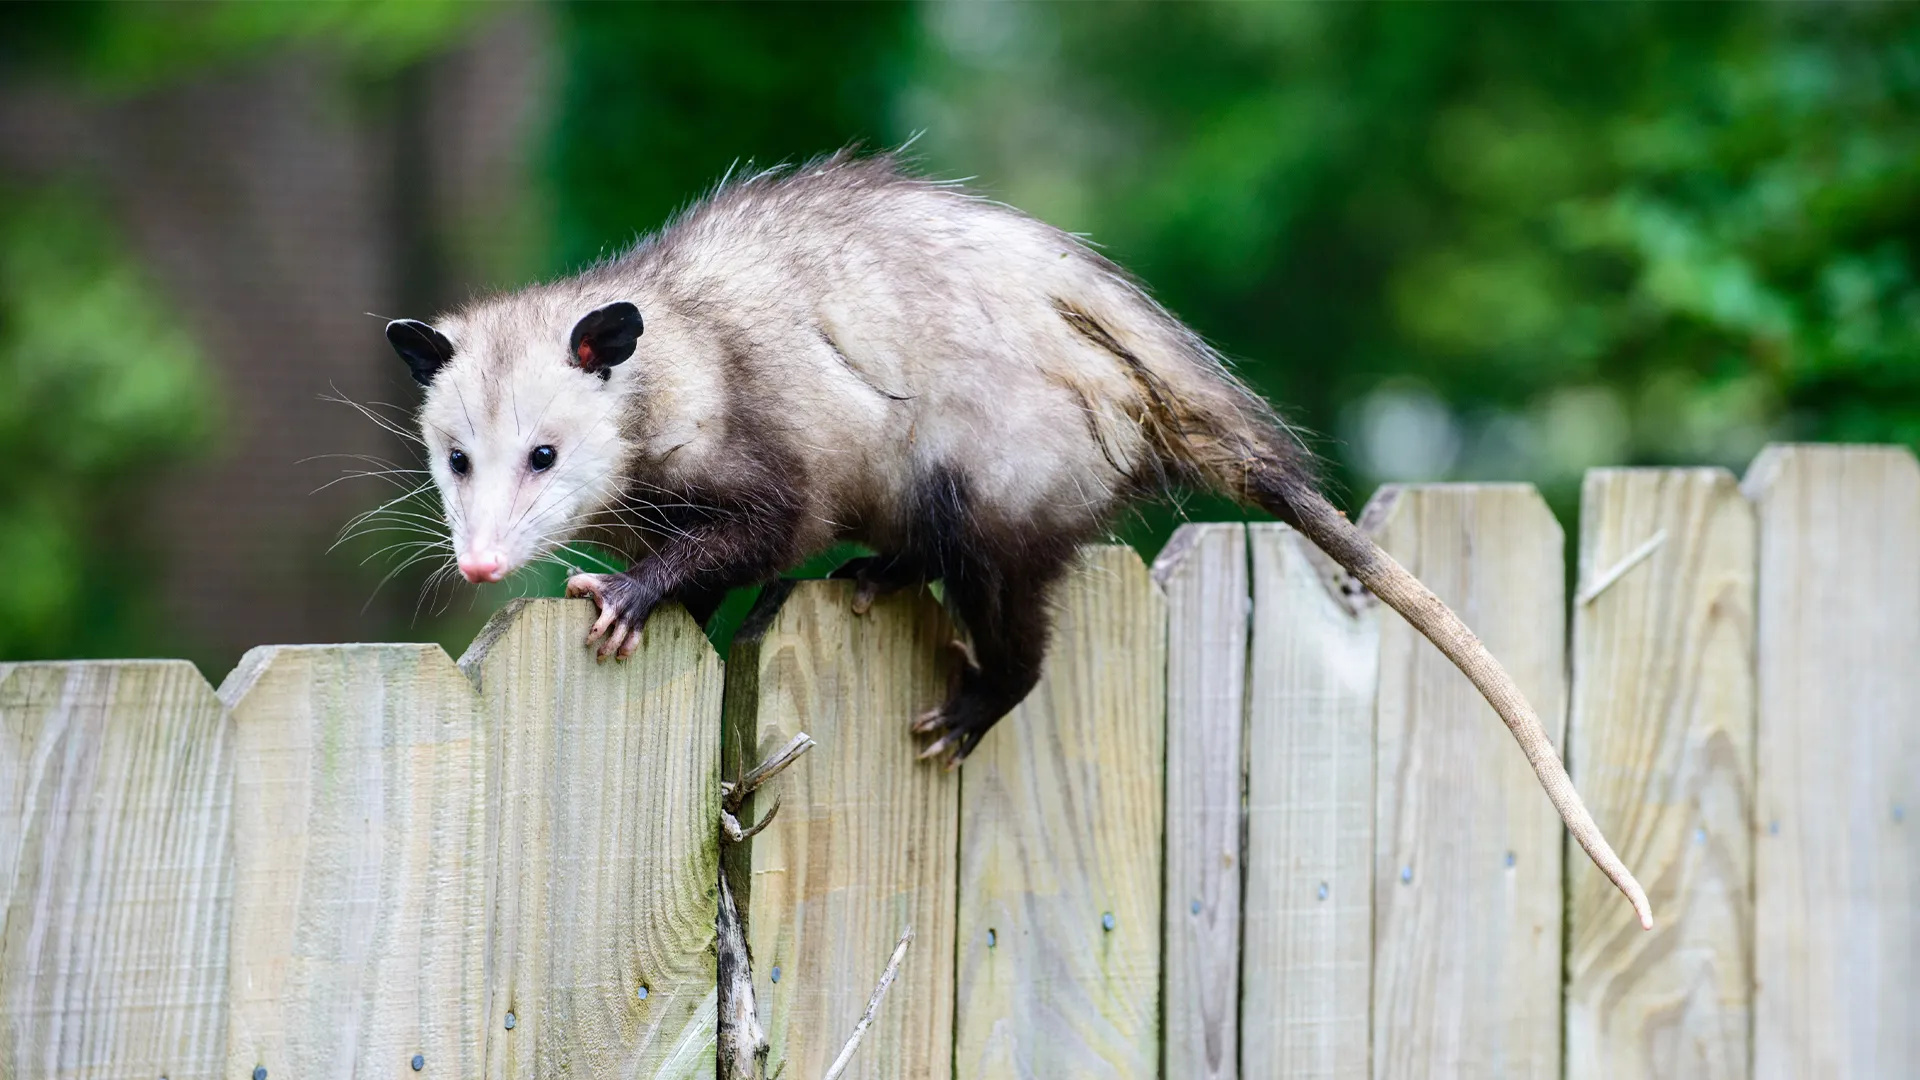 Opossum trapping, Wildlife management, Pest control solutions, Humane techniques, 1920x1080 Full HD Desktop